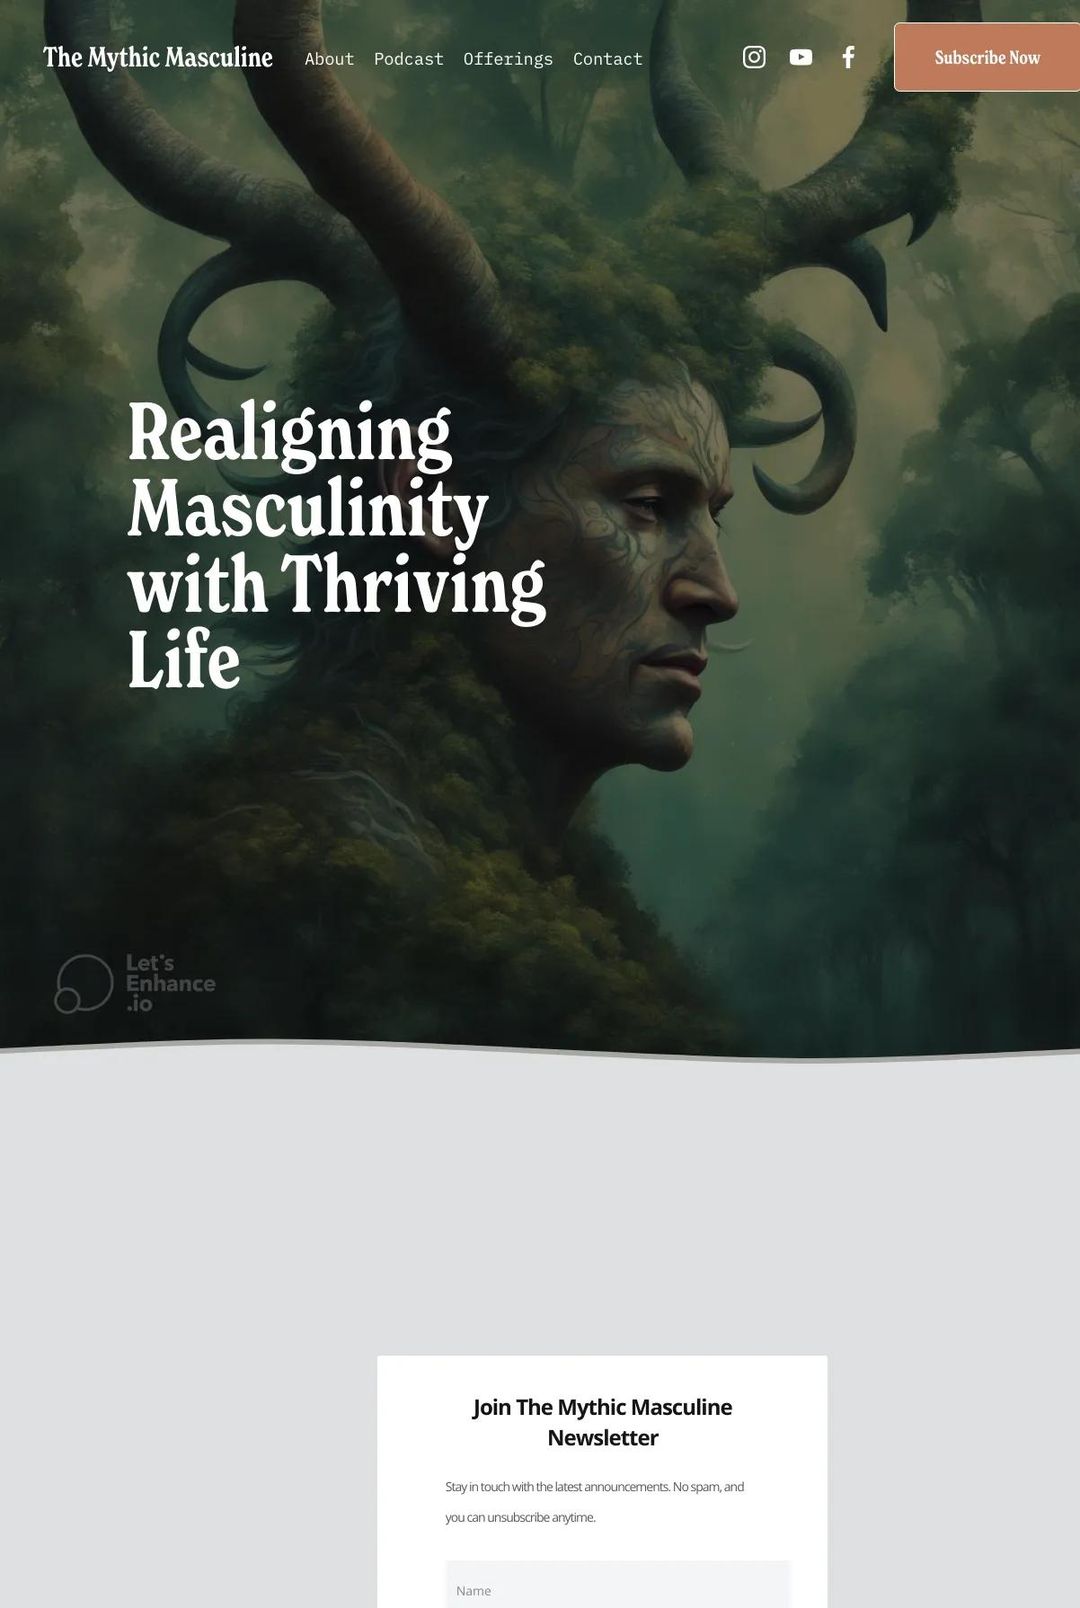 Screenshot 1 of The Mythic Masculine (Example Squarespace Podcast Website)